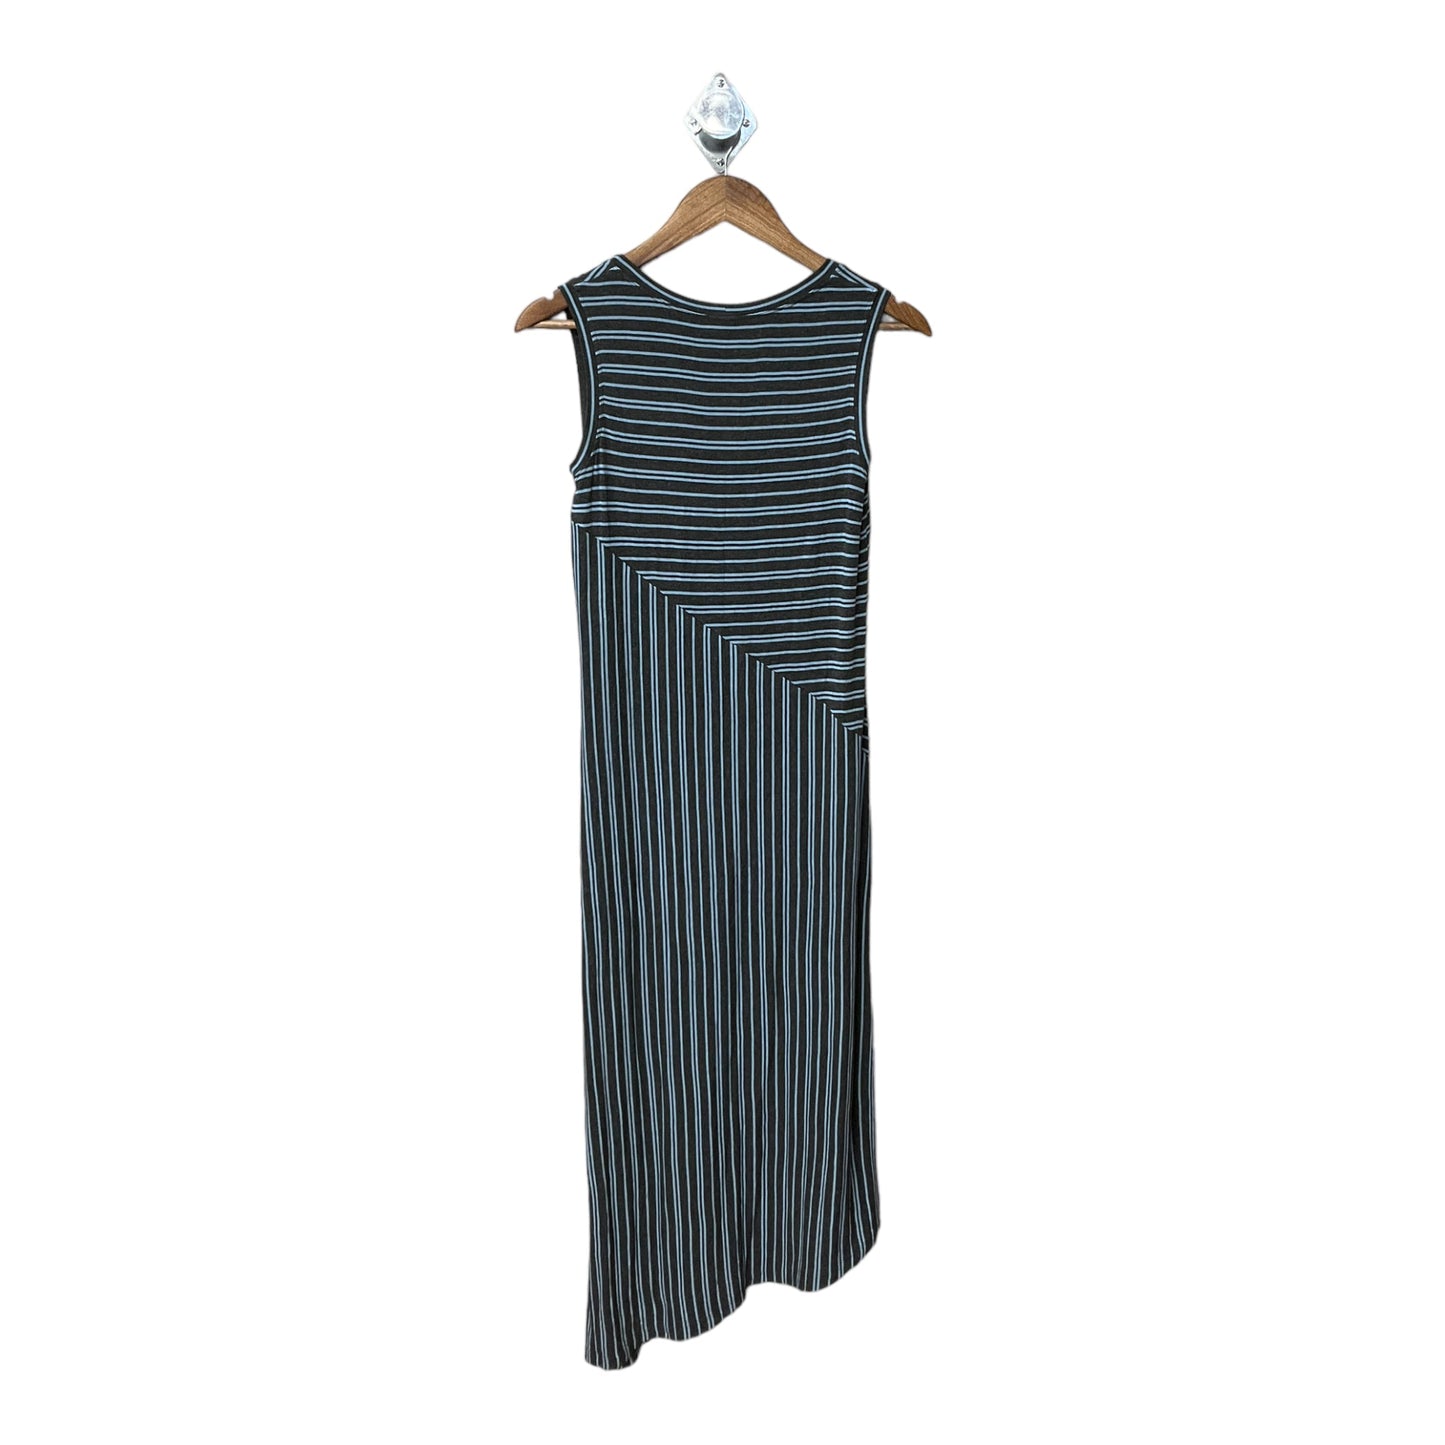 Dress Casual Maxi By Cabi  Size: Xs